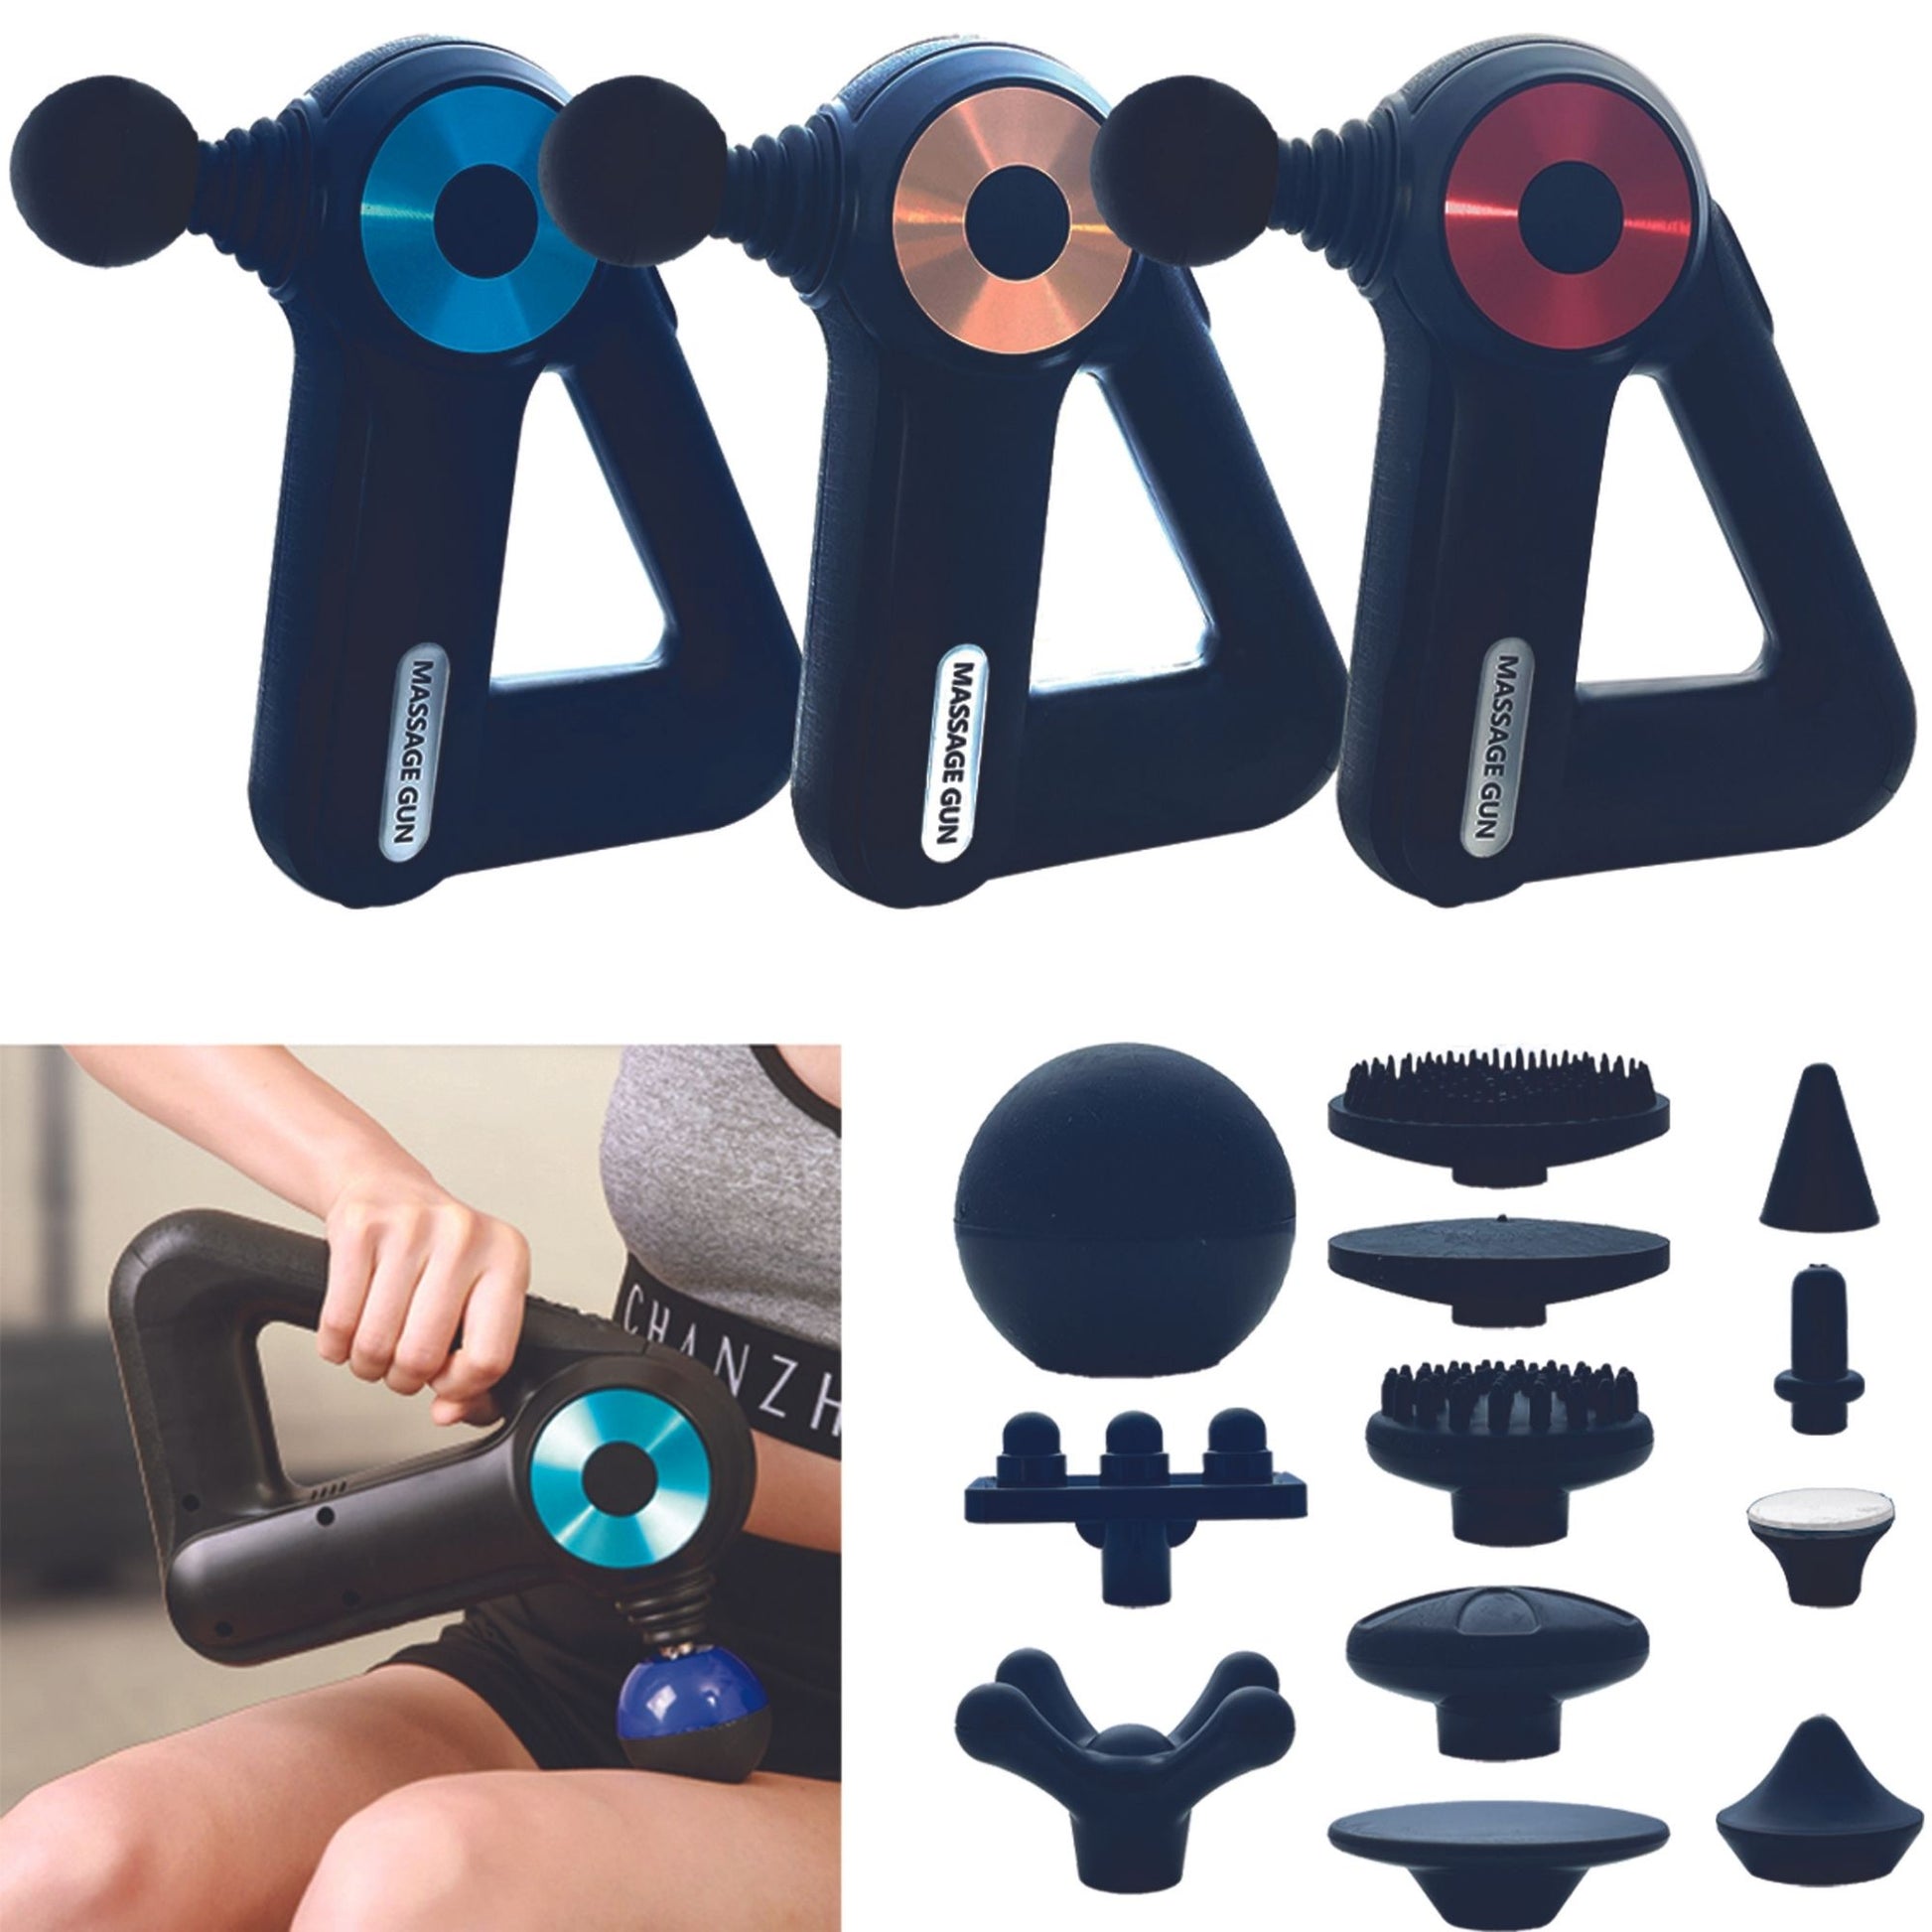 6 Speed Massage Gun With 12 Attachments And 4 Massage Modes - home • office • health